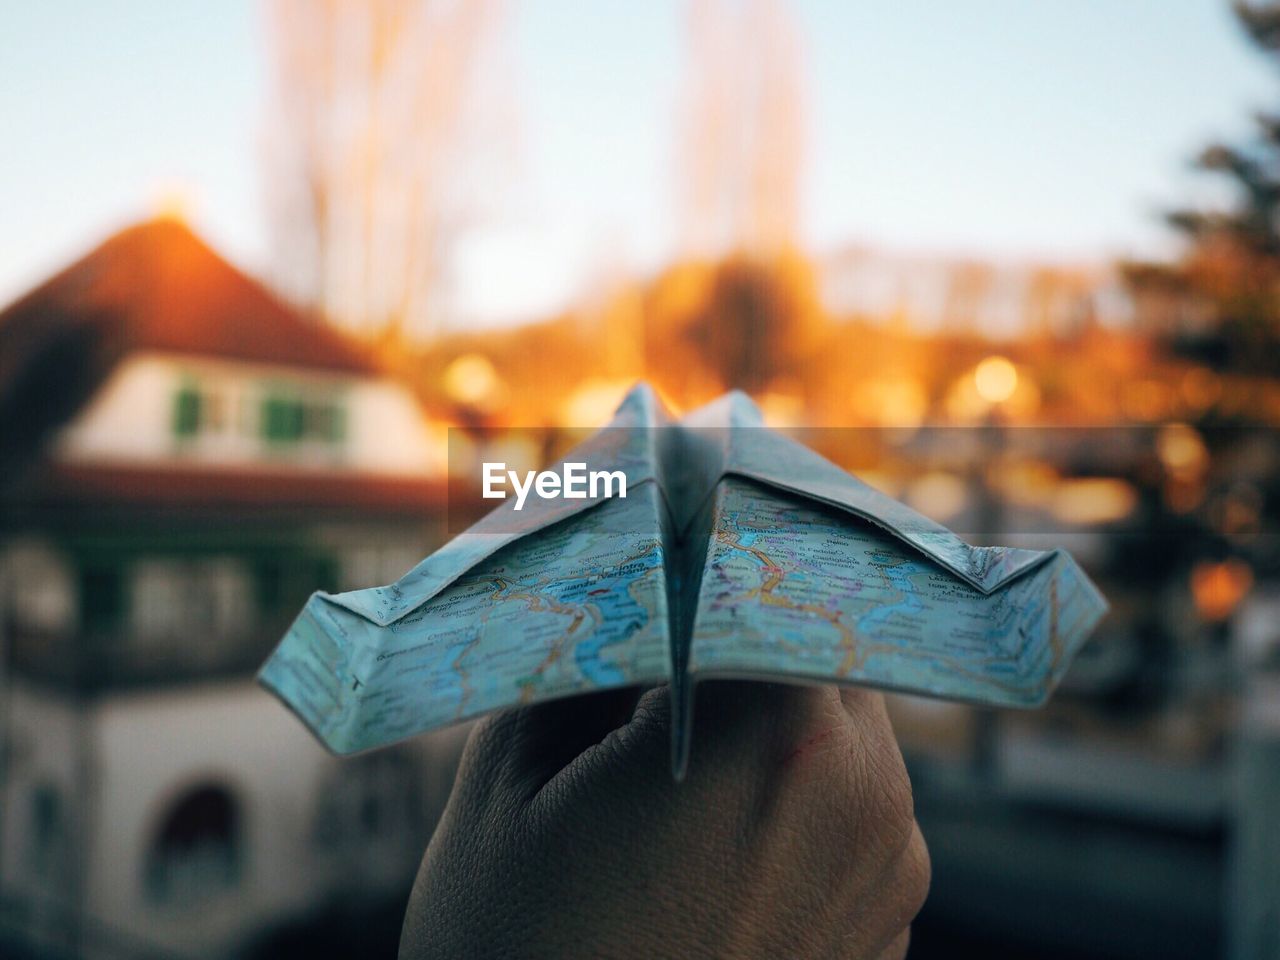 Cropped image of hand holding paper airplane made of map against houses